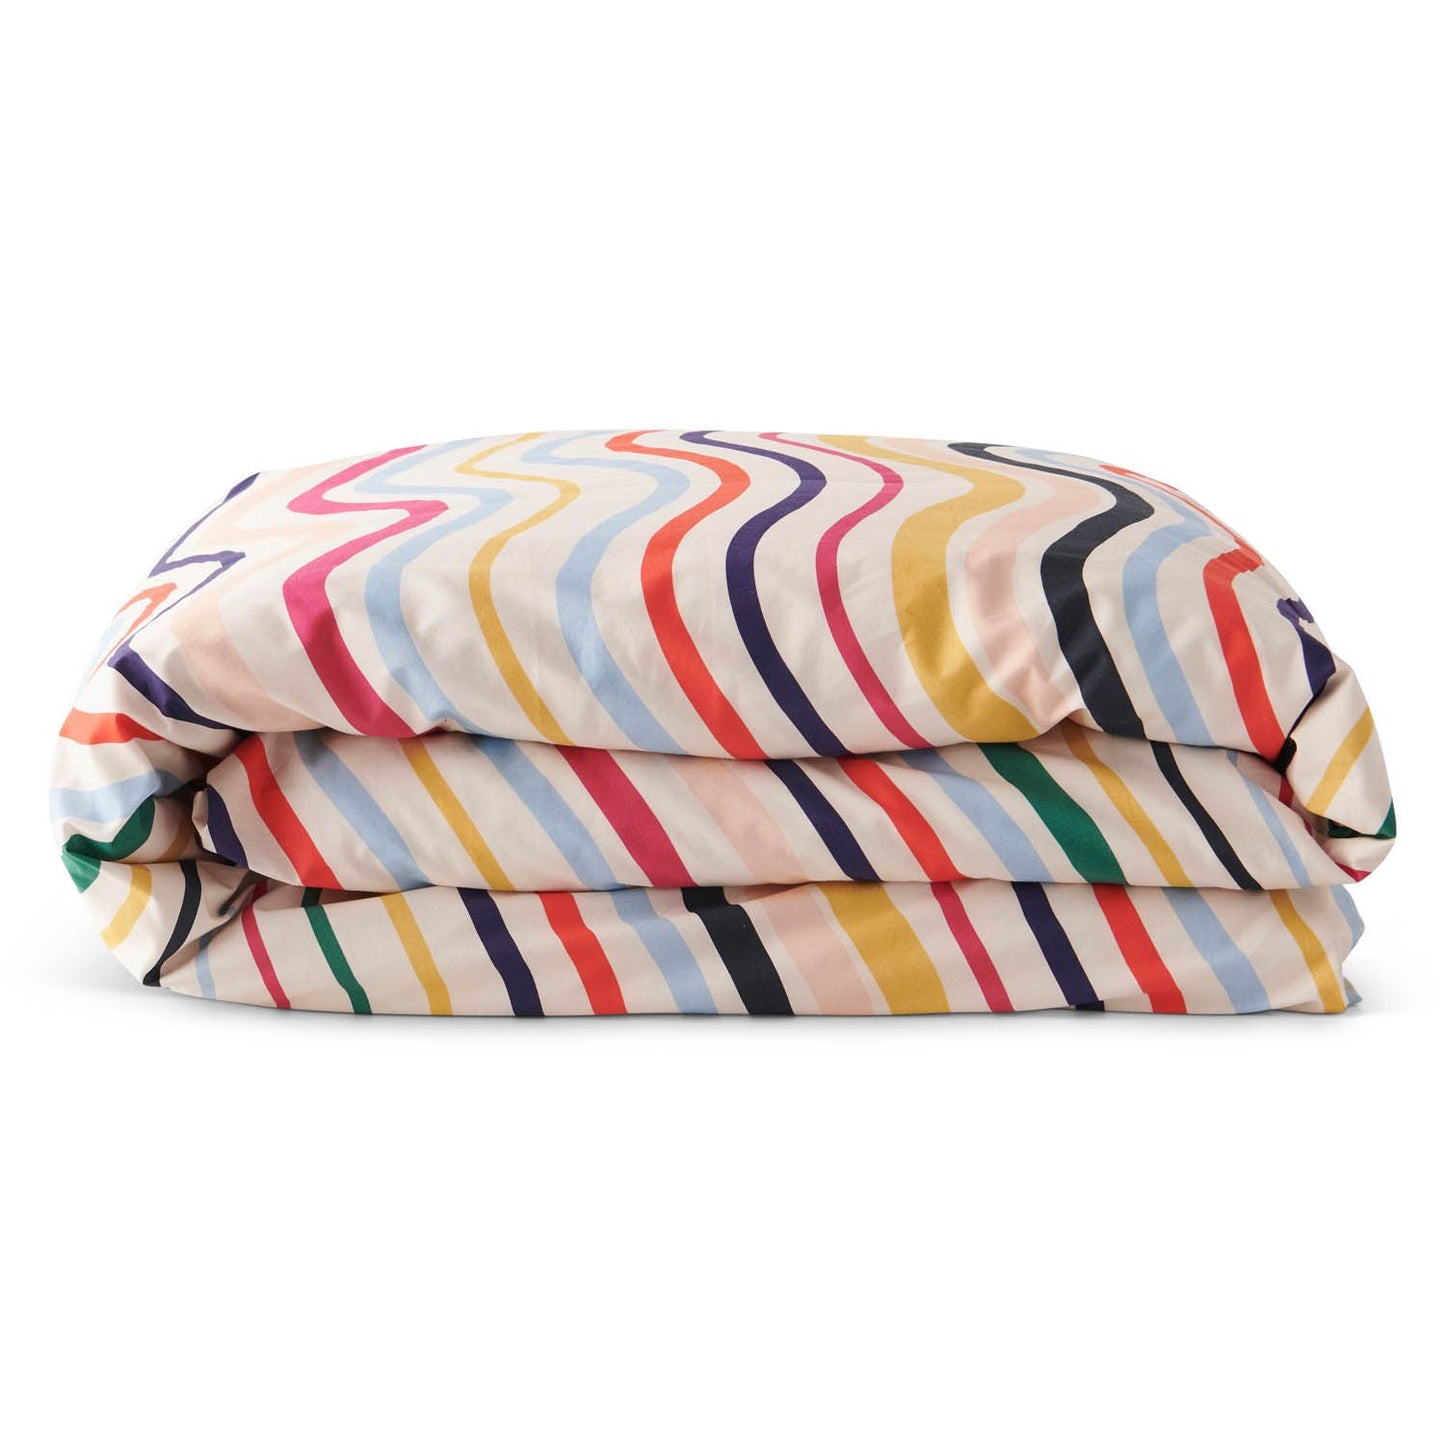 Kip and Co Rainbow Ripple quilt cover